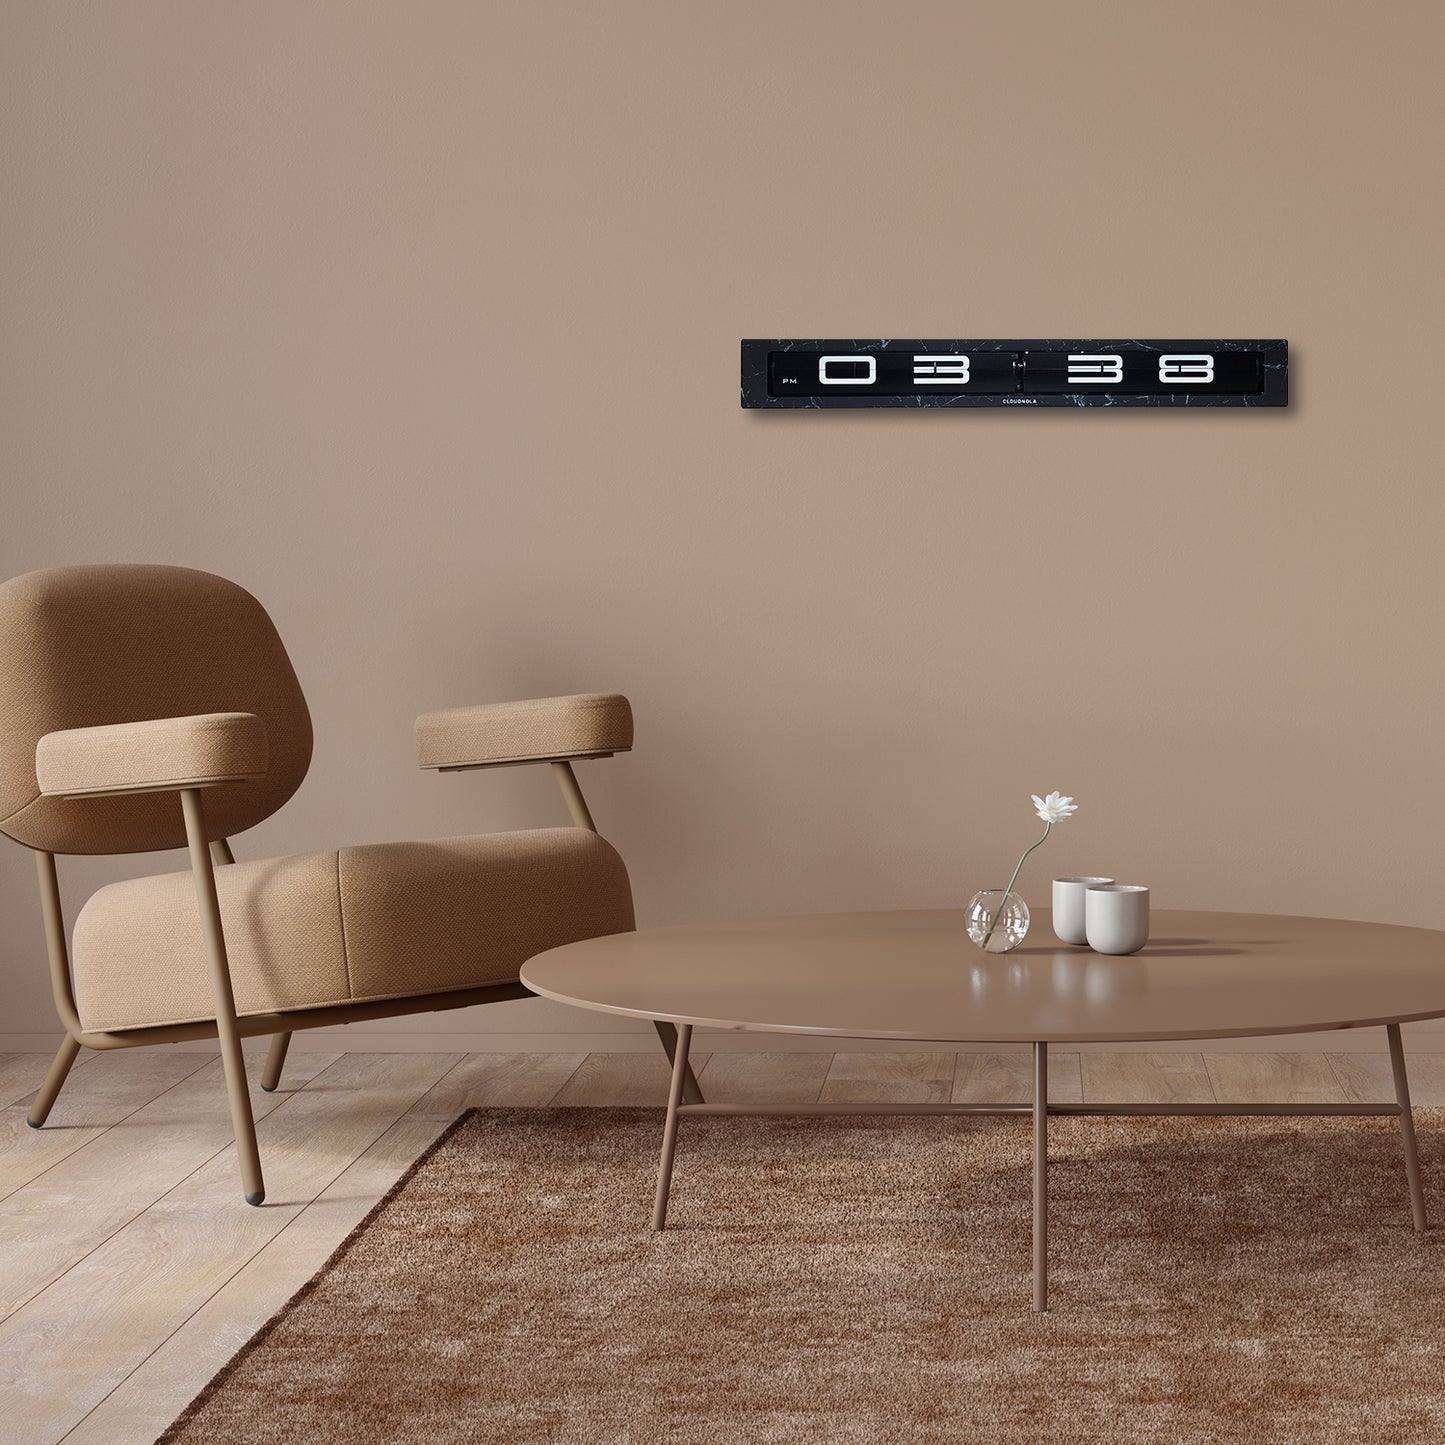 Timeline Smoke Effect AM/PM Edition - Flip Clock - 26 inches wide - A Modern Masterpiece in Timekeeping